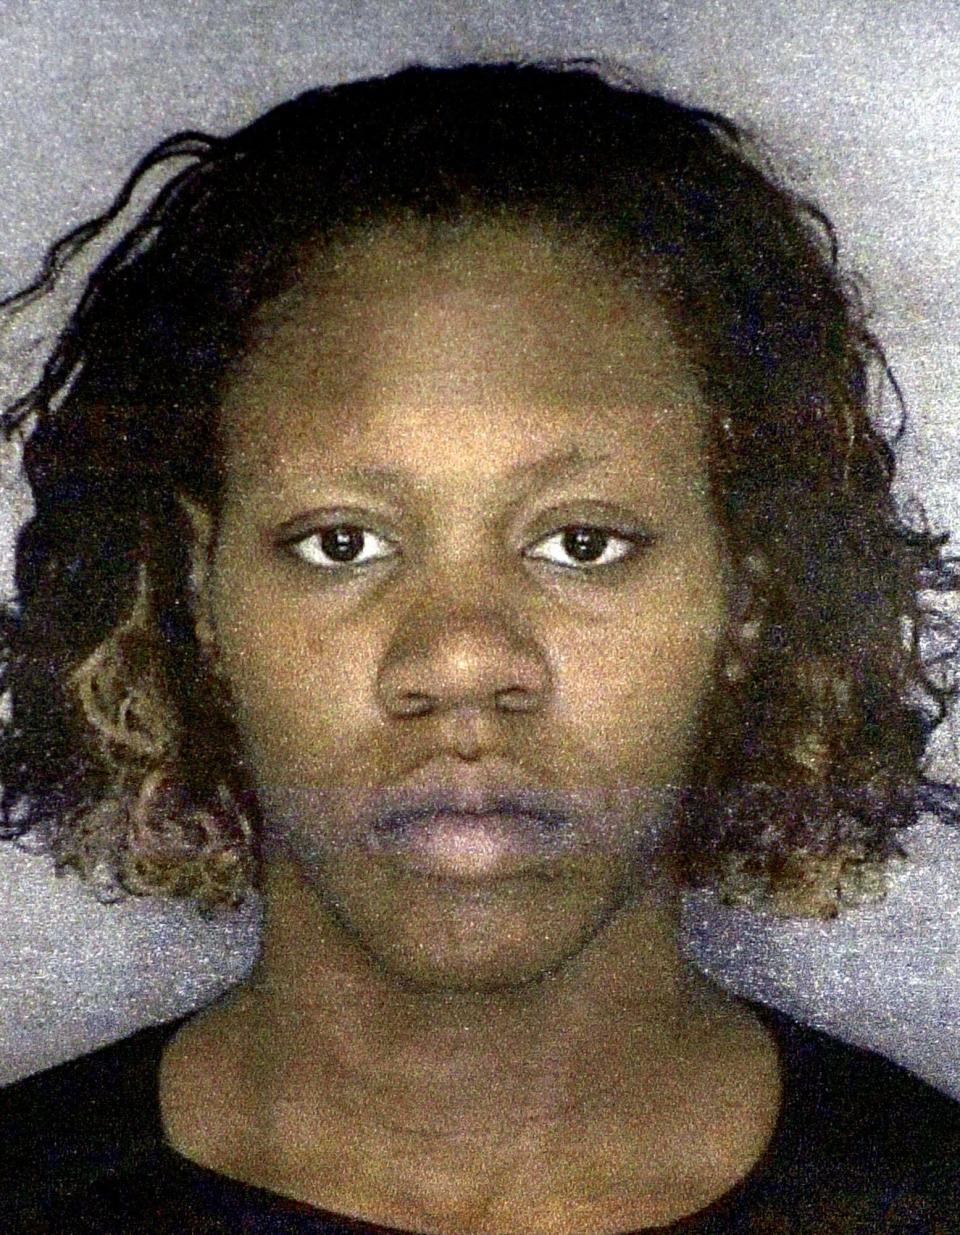 Uniqua Smith, convicted of second-degree murder in 2004 in the beating death of her 2-year-old daughter